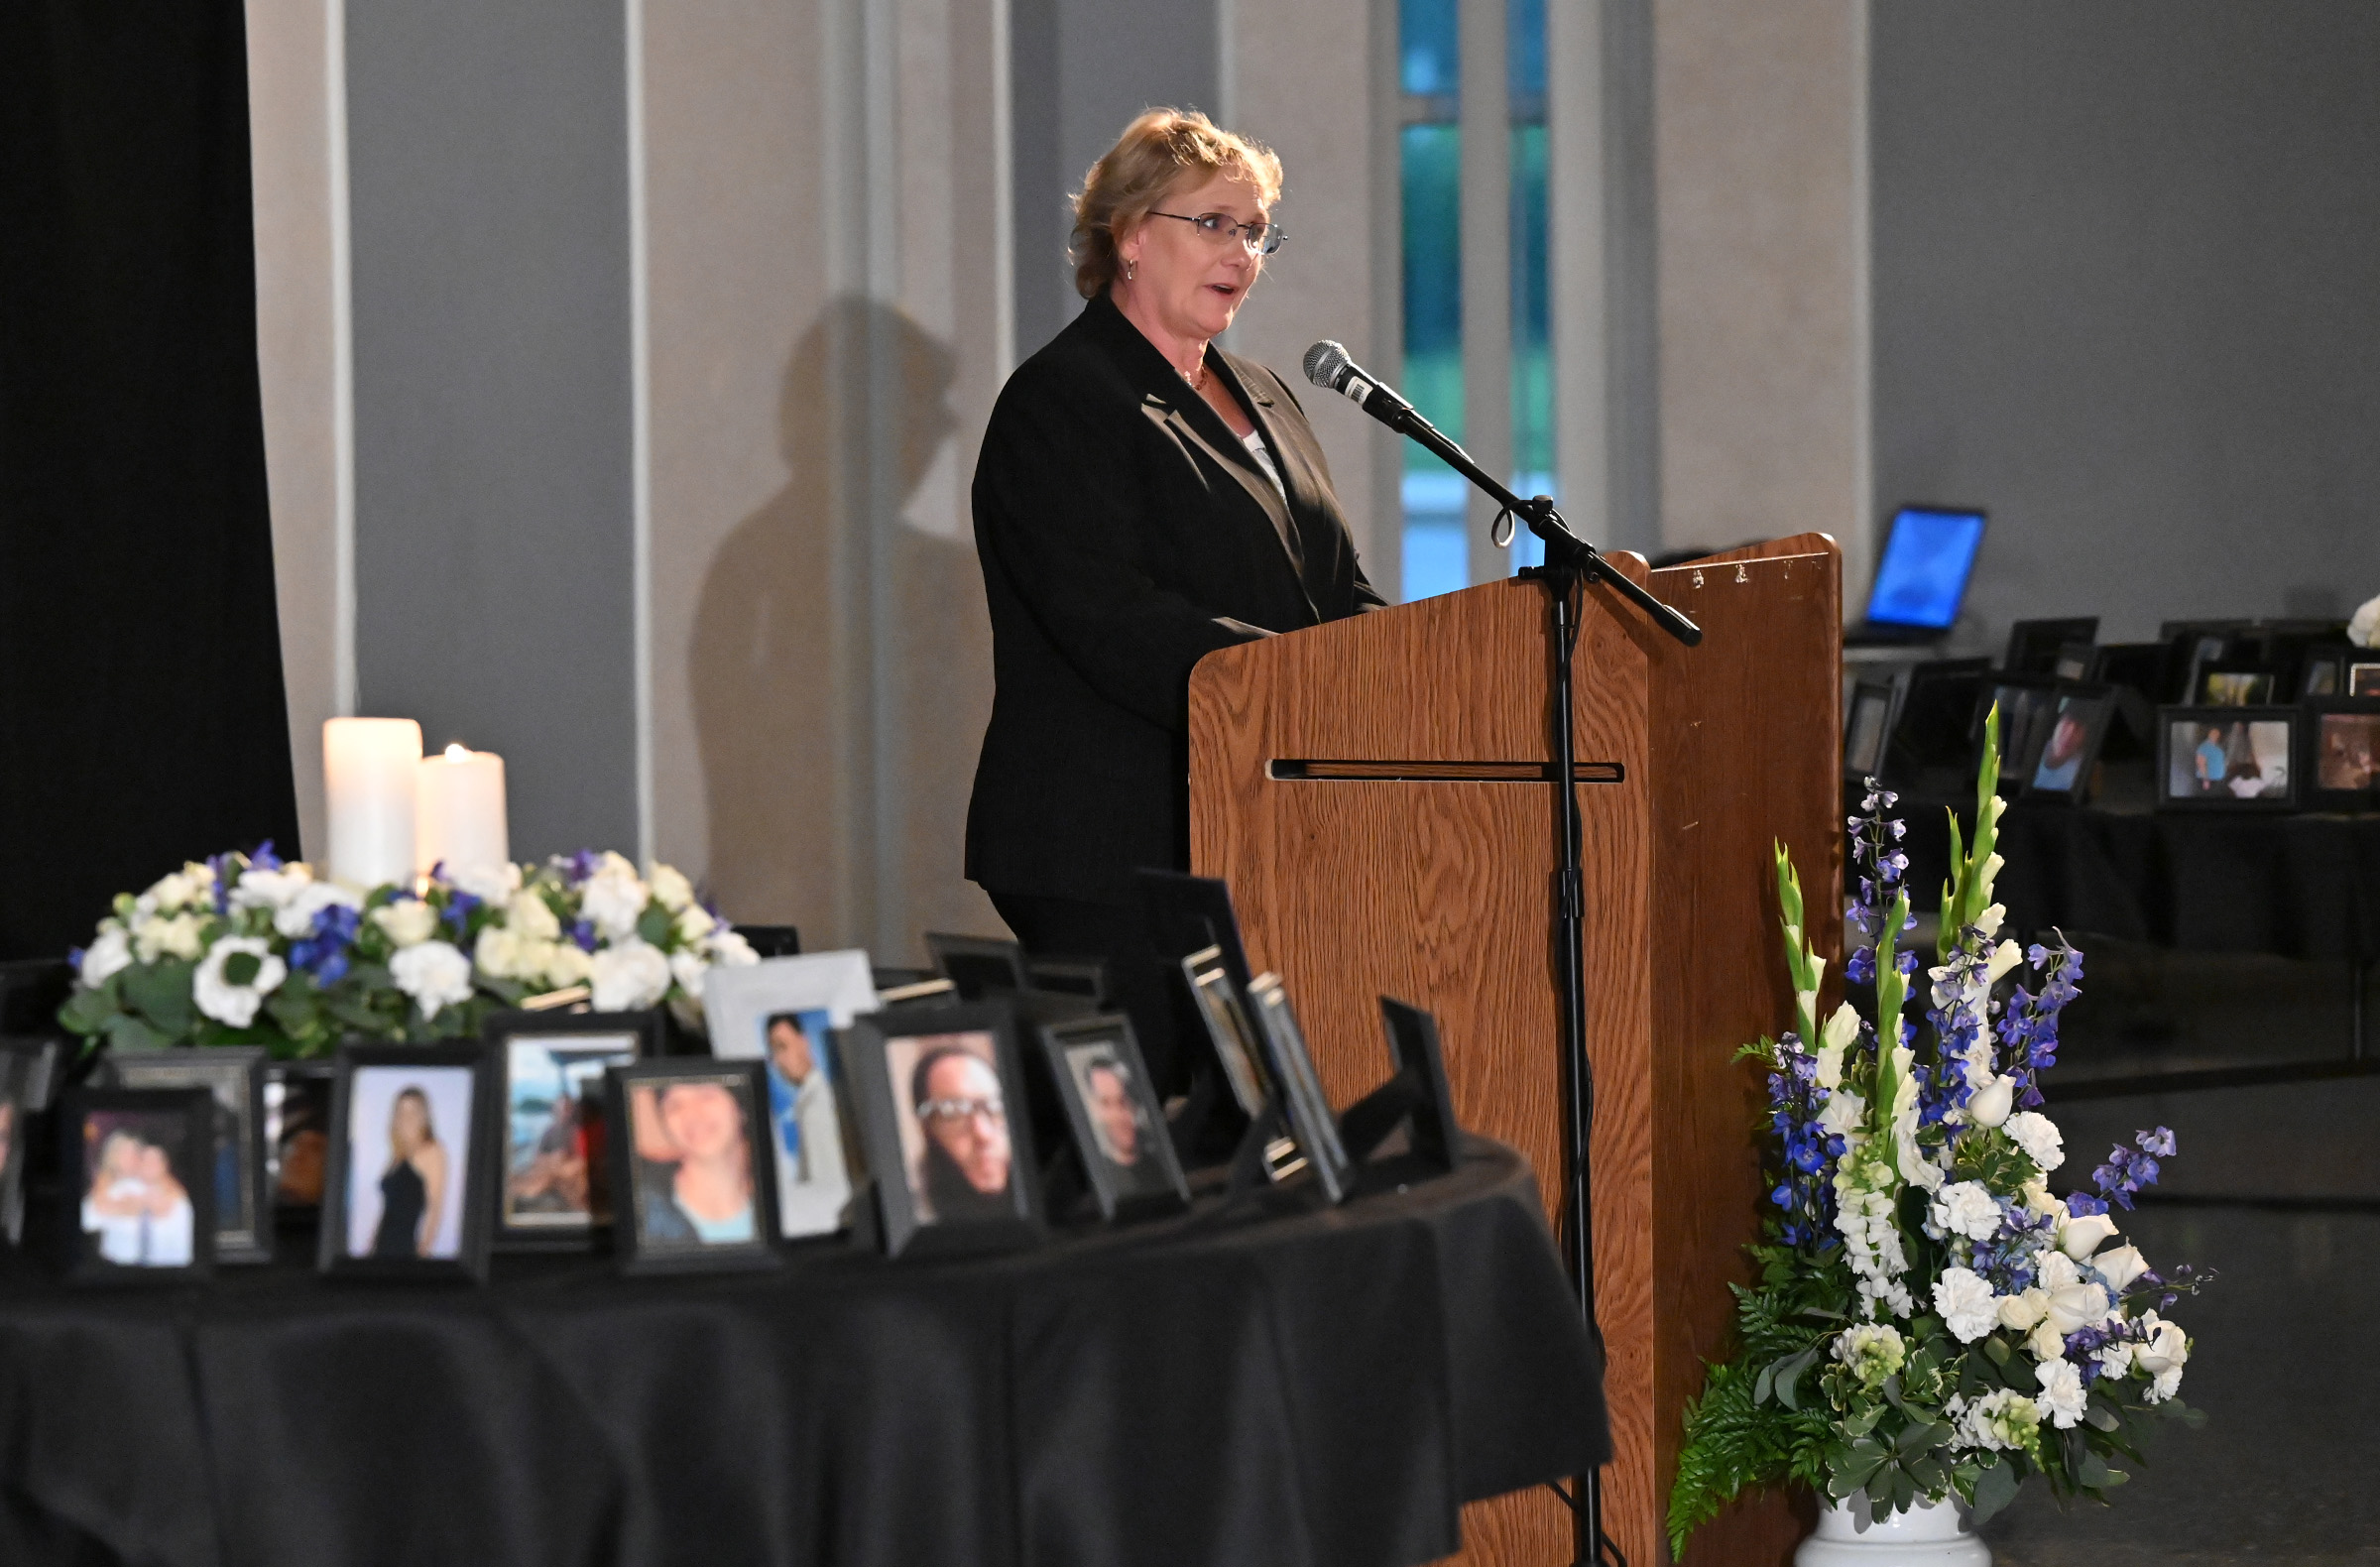 Beth Schmidt offers "A Family's Perspective" at 9th Annual Drug Overdose and Prevention Vigil Tuesday at Portico at St. John in Westminster. (Jeffrey F. Bill/Staff photo)